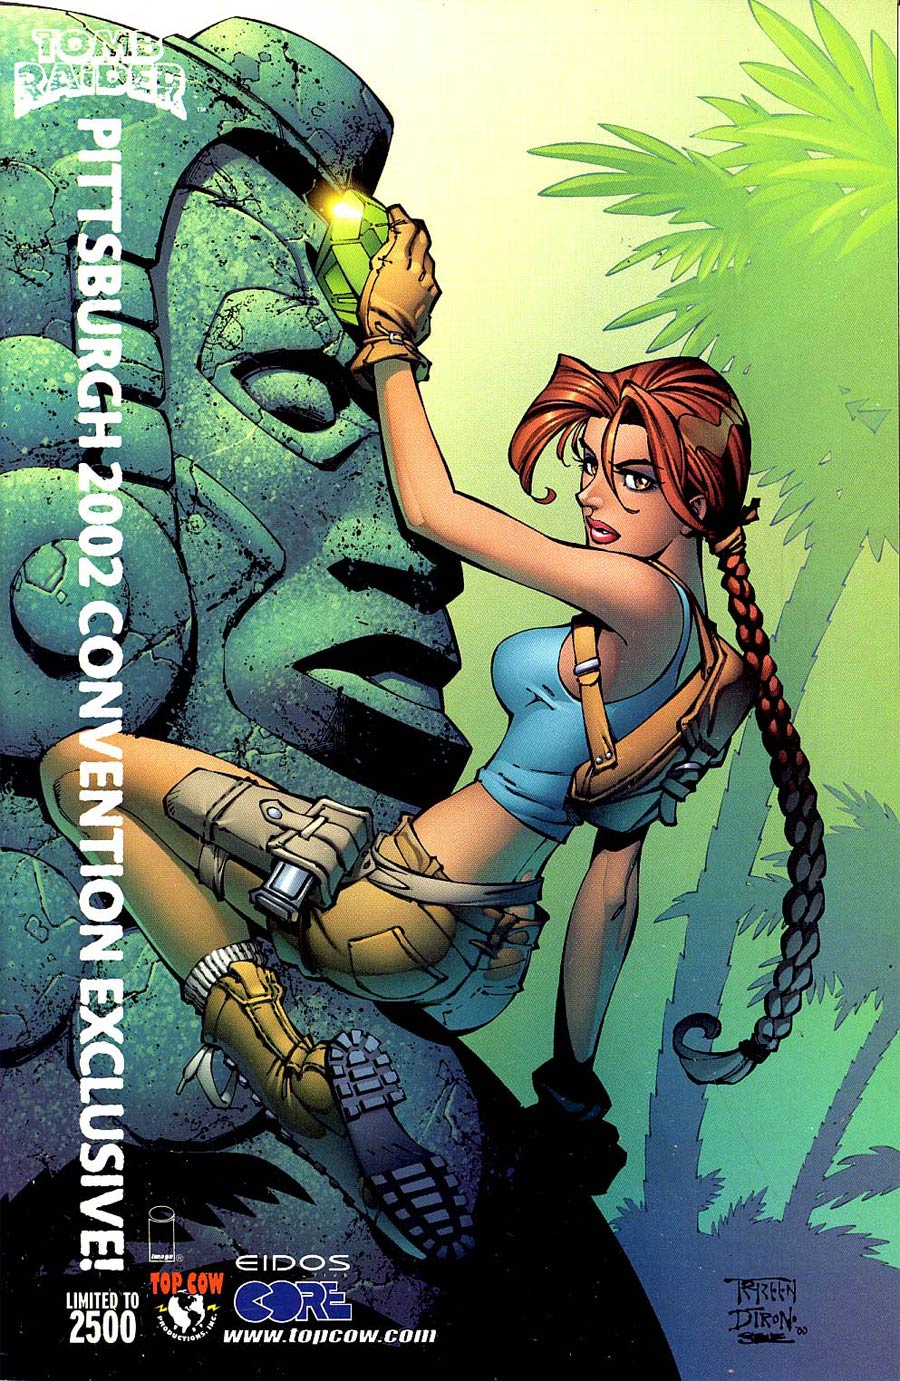 Tomb Raider #21 Cover B Pittsburgh 2002 Convention Exclusive